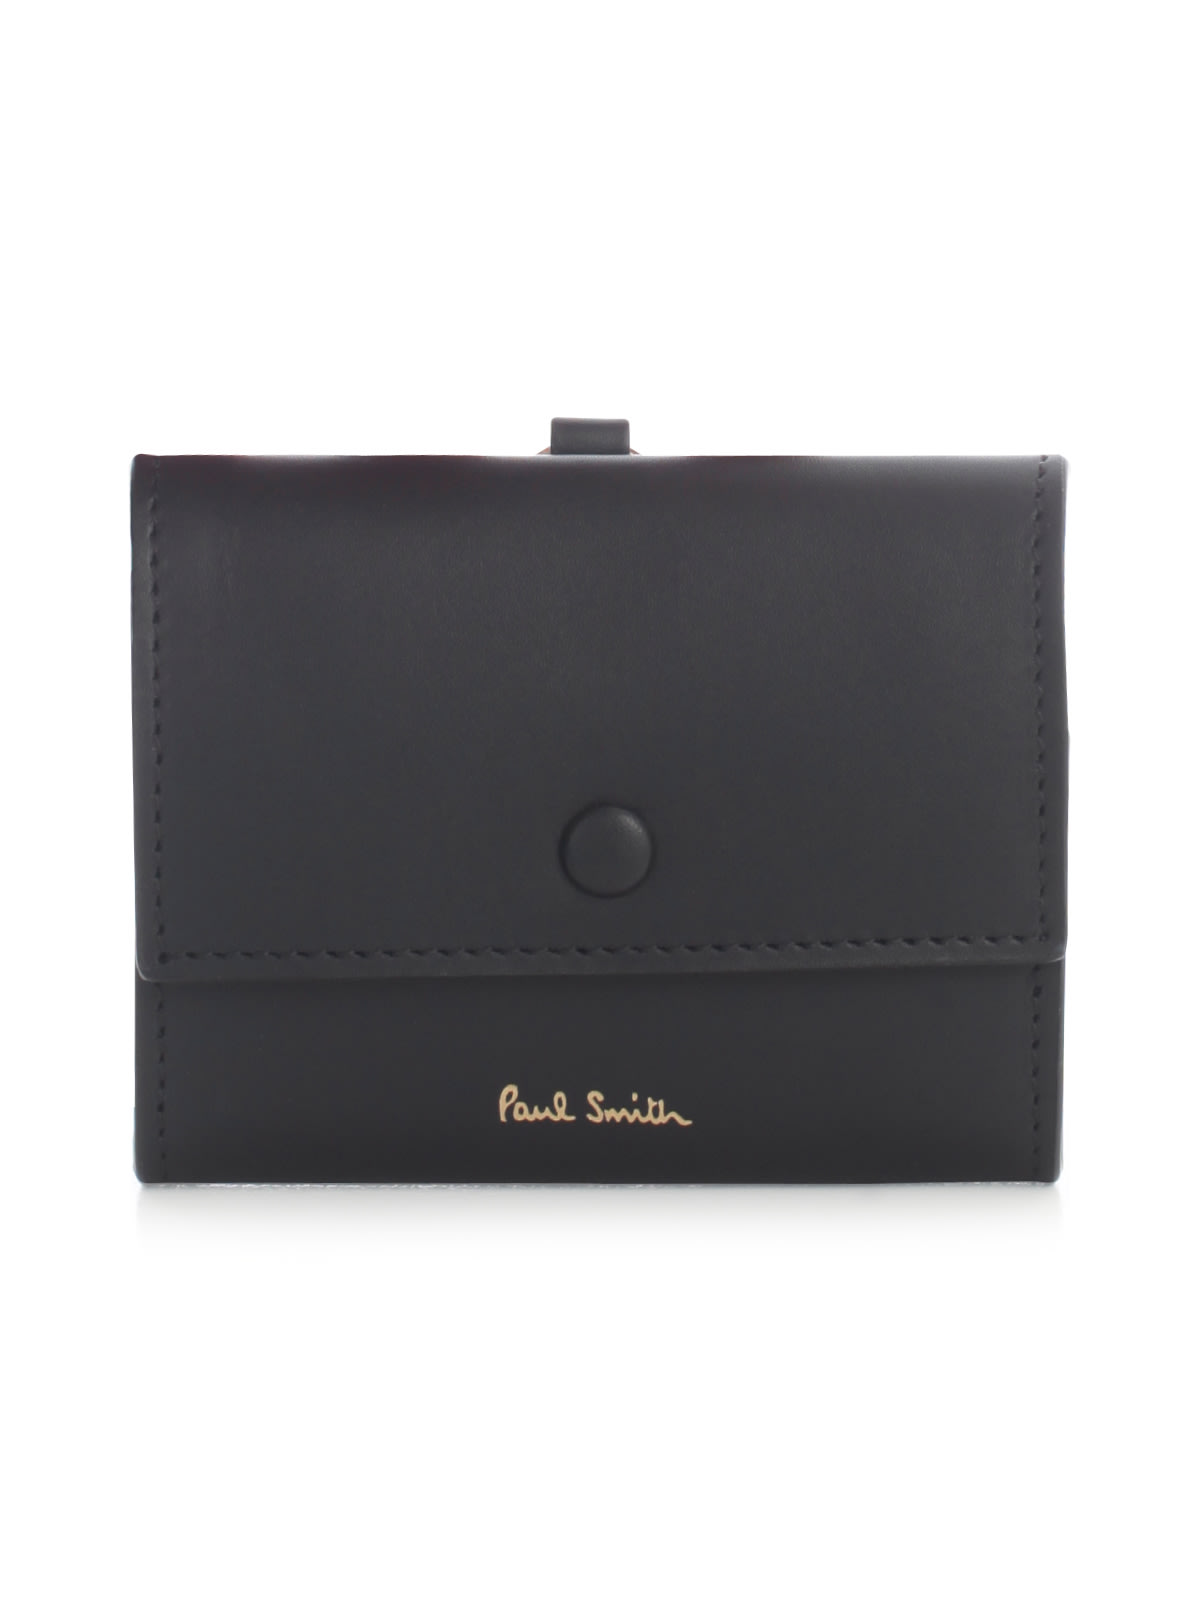 Paul Smith Wallet Clip On Pouch